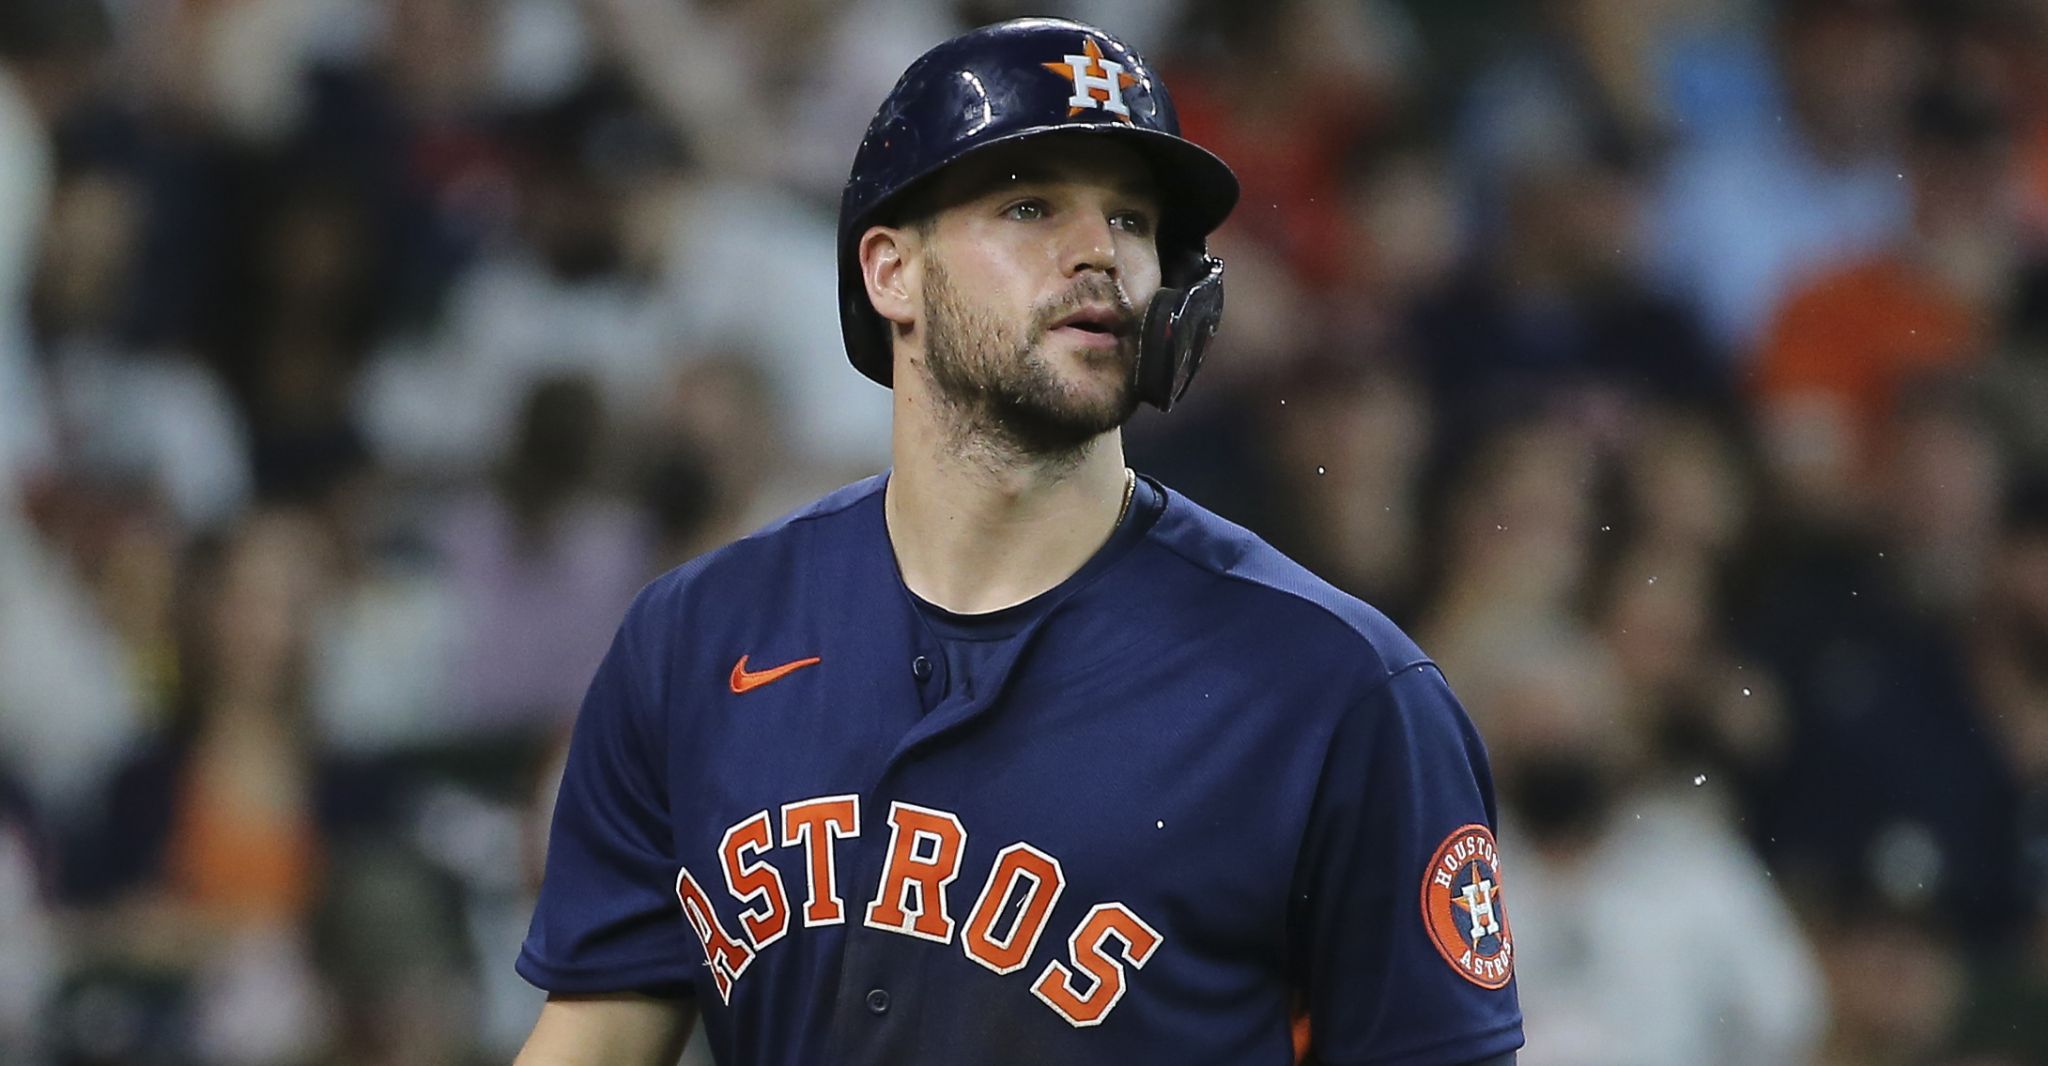 Report reveals reason for benching 1 of Astros best players - SportsMap